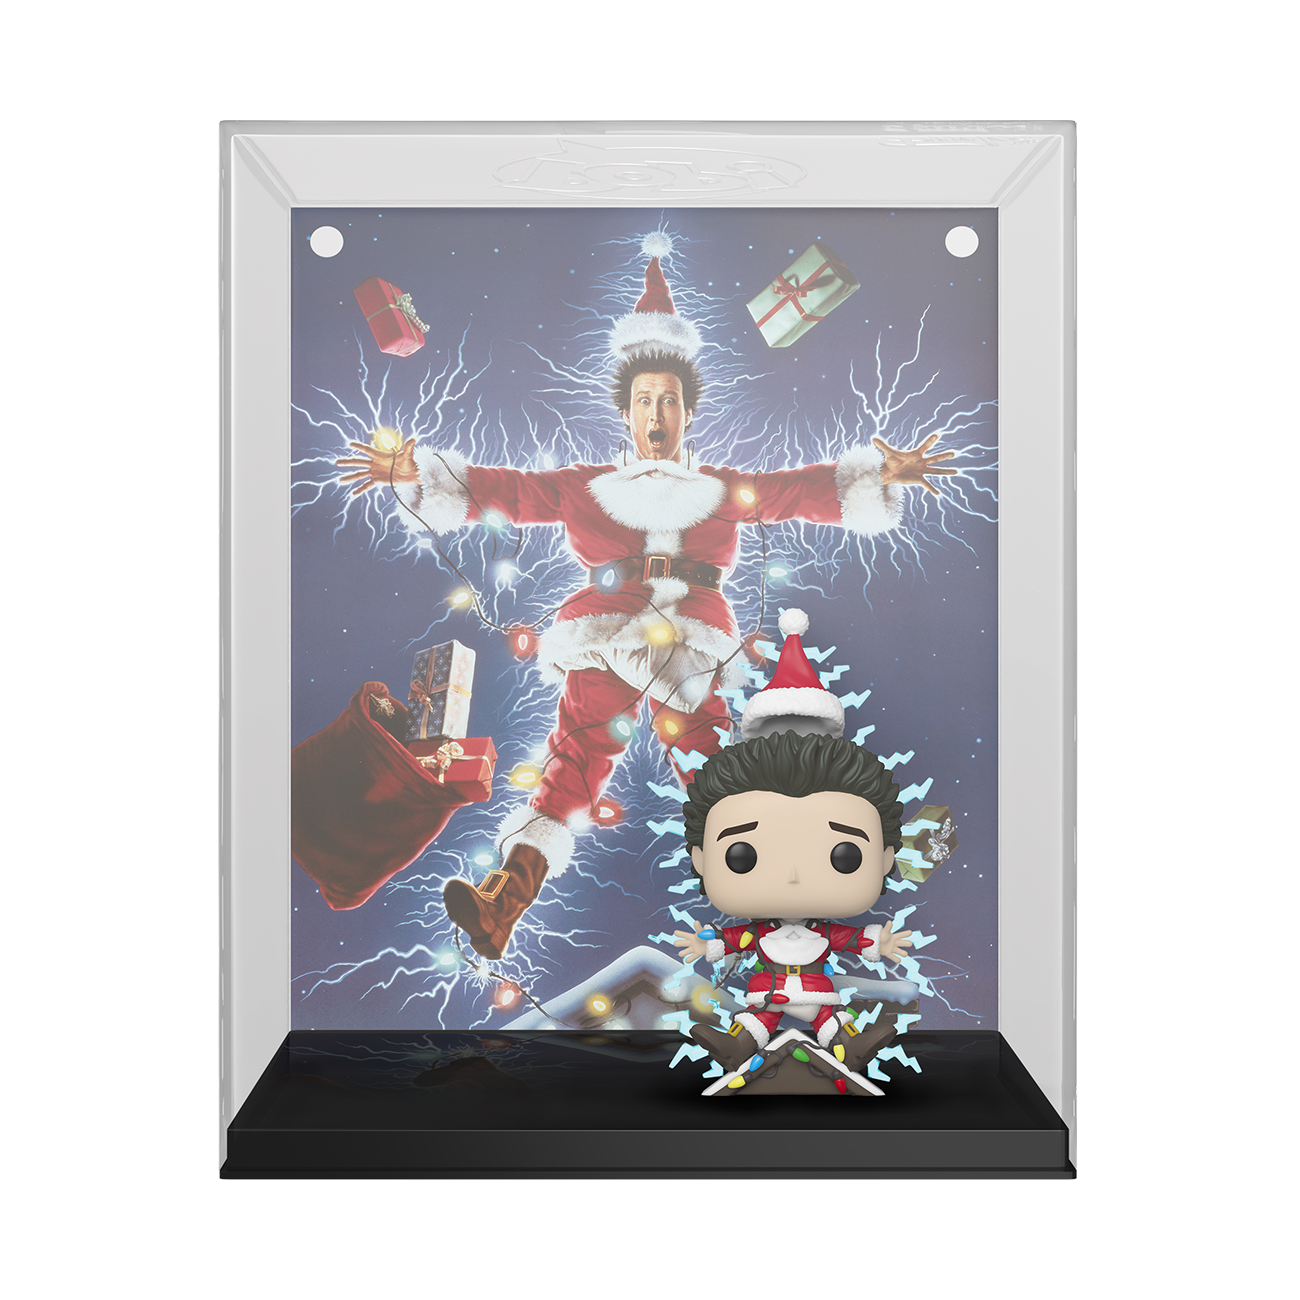 Funko Pop! VHS Cover: National Lampoon’s Christmas Vacation Vinyl Figure (Walmart Exclusive) - image 2 of 5